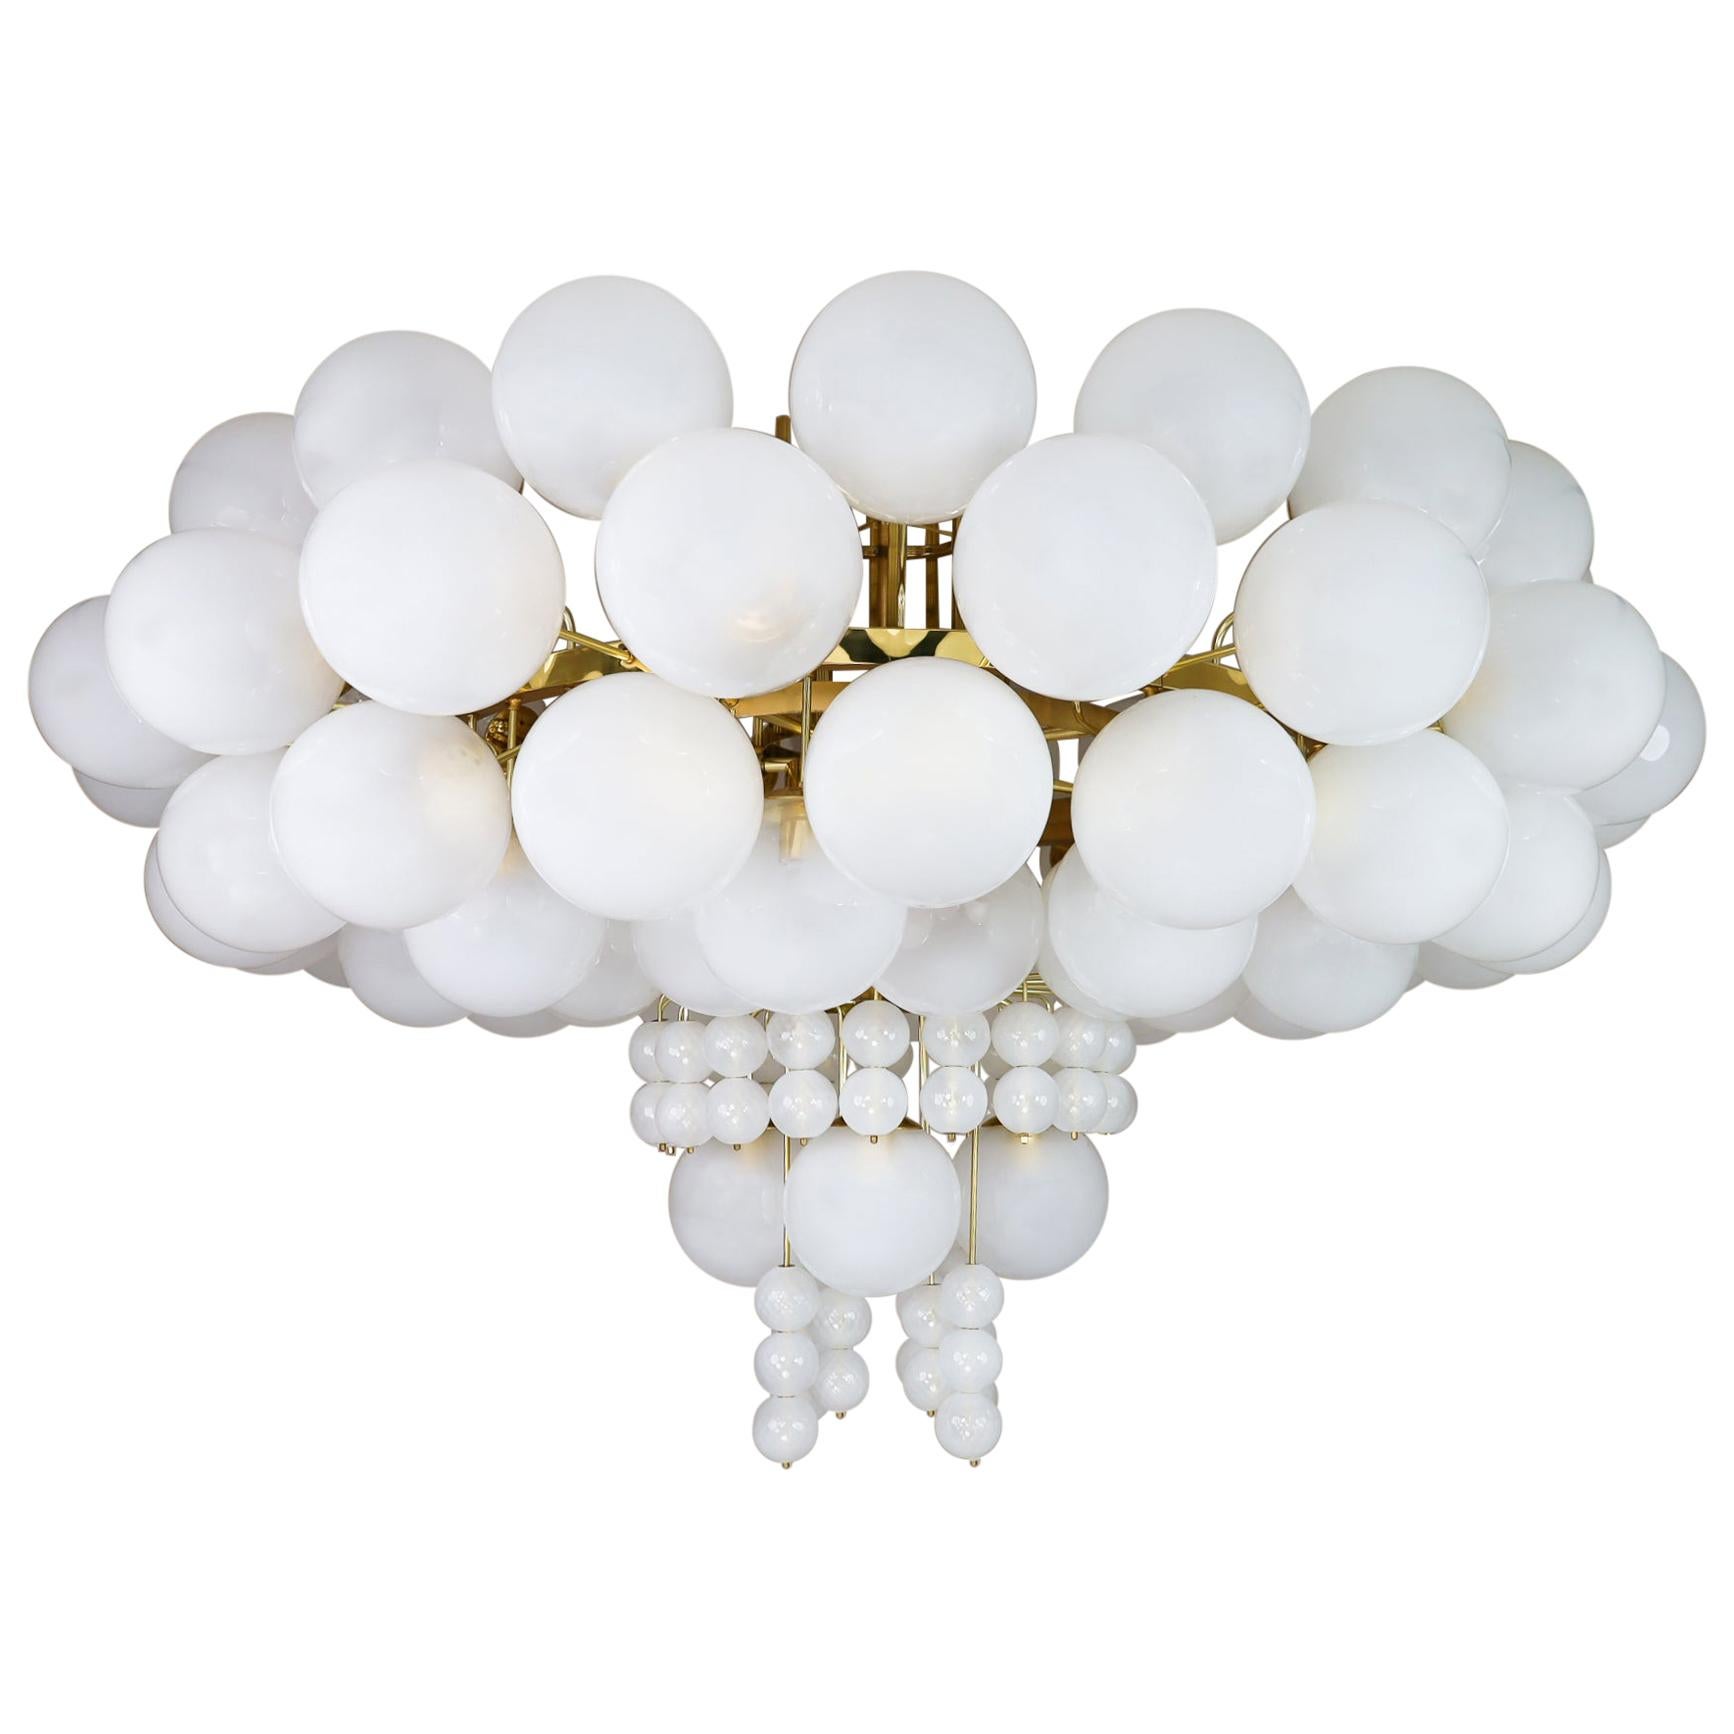 XXL Hotel Chandelier with Brass Fixture and Hand-Blowed Frosted Glass Globes